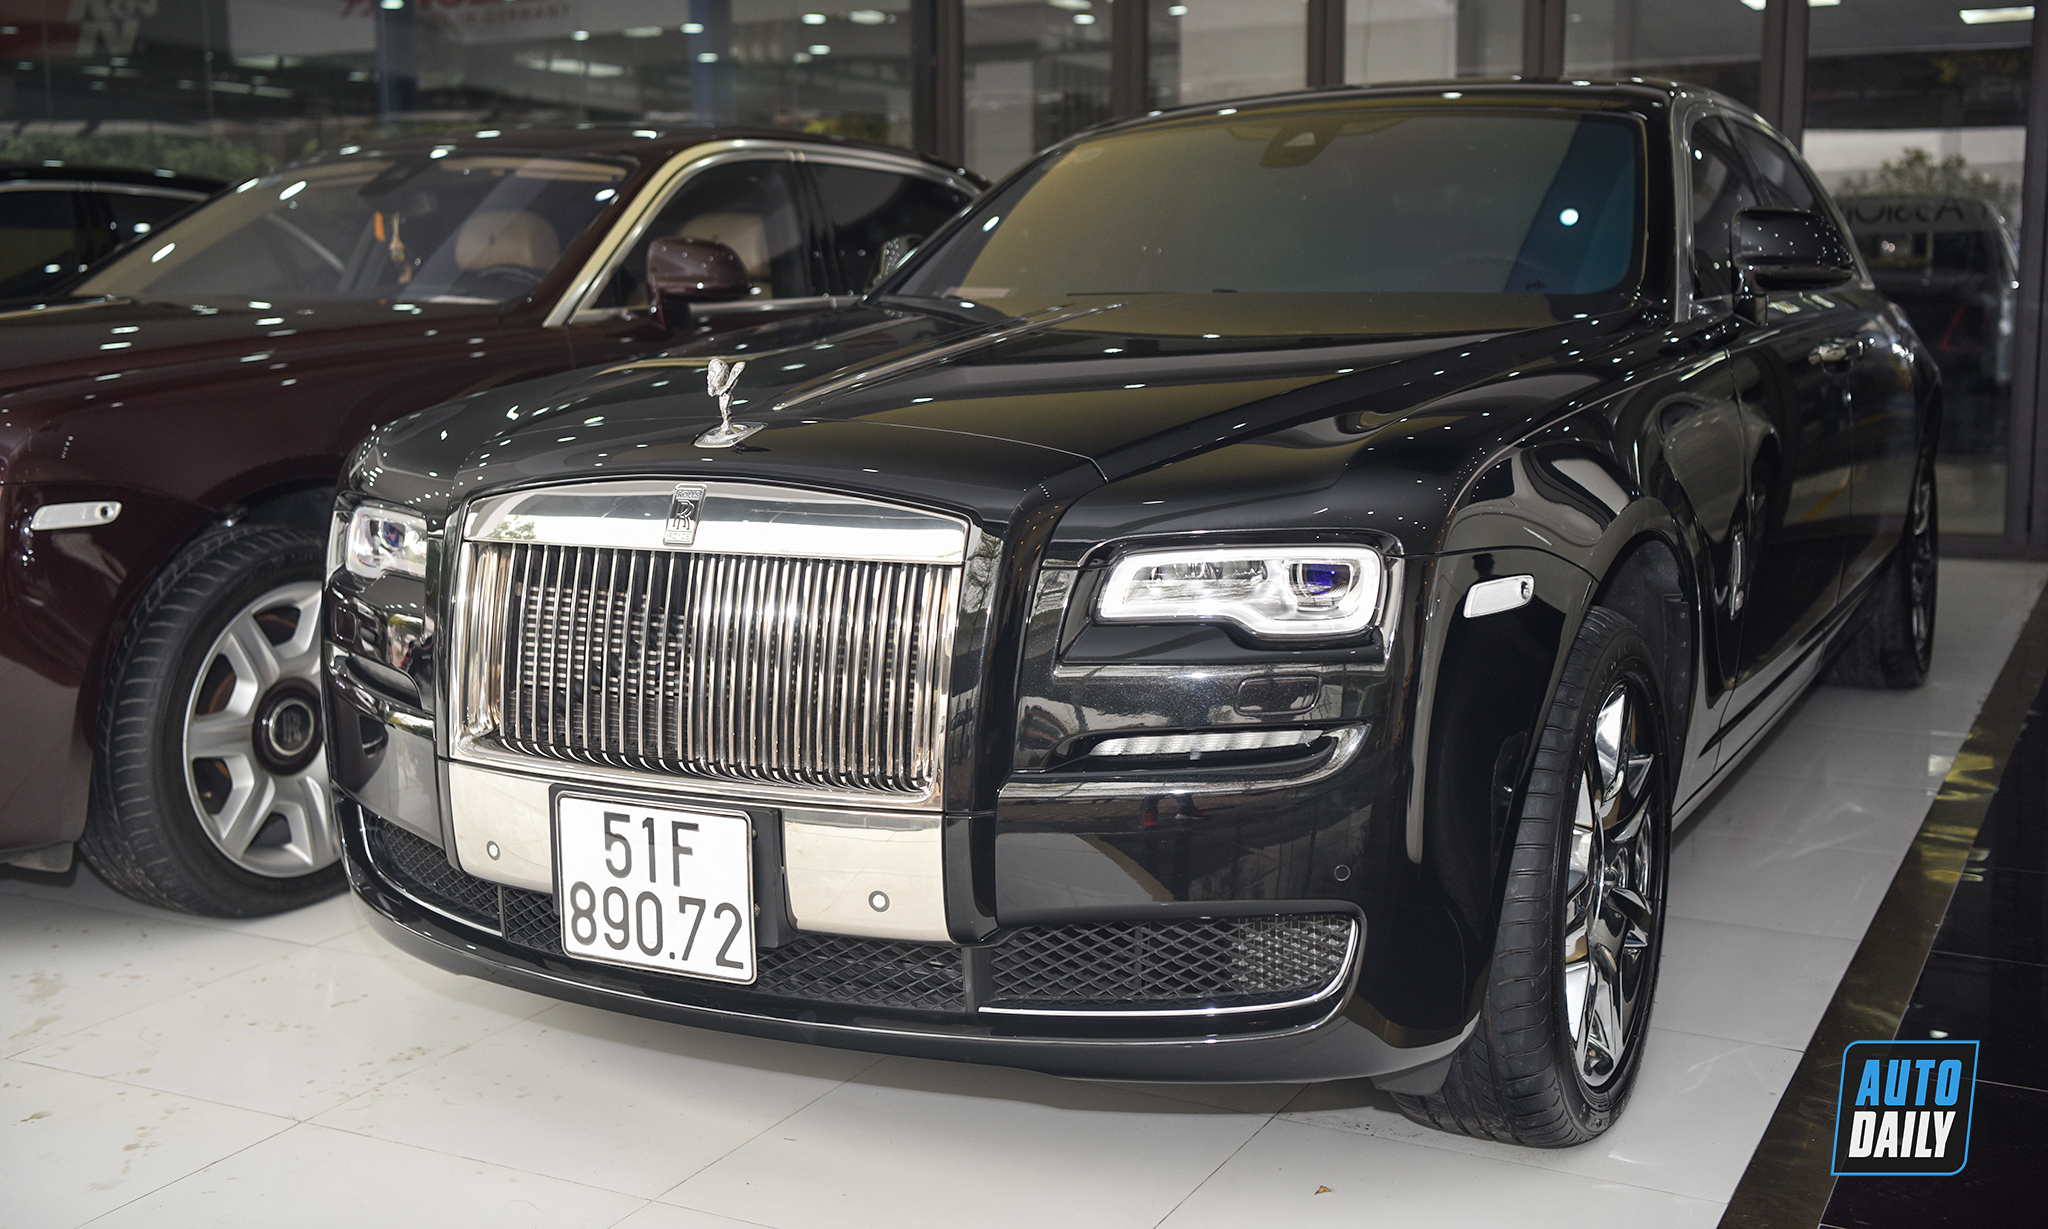 RollsRoyce expands dealer network in the Philippines  Autocar Professional